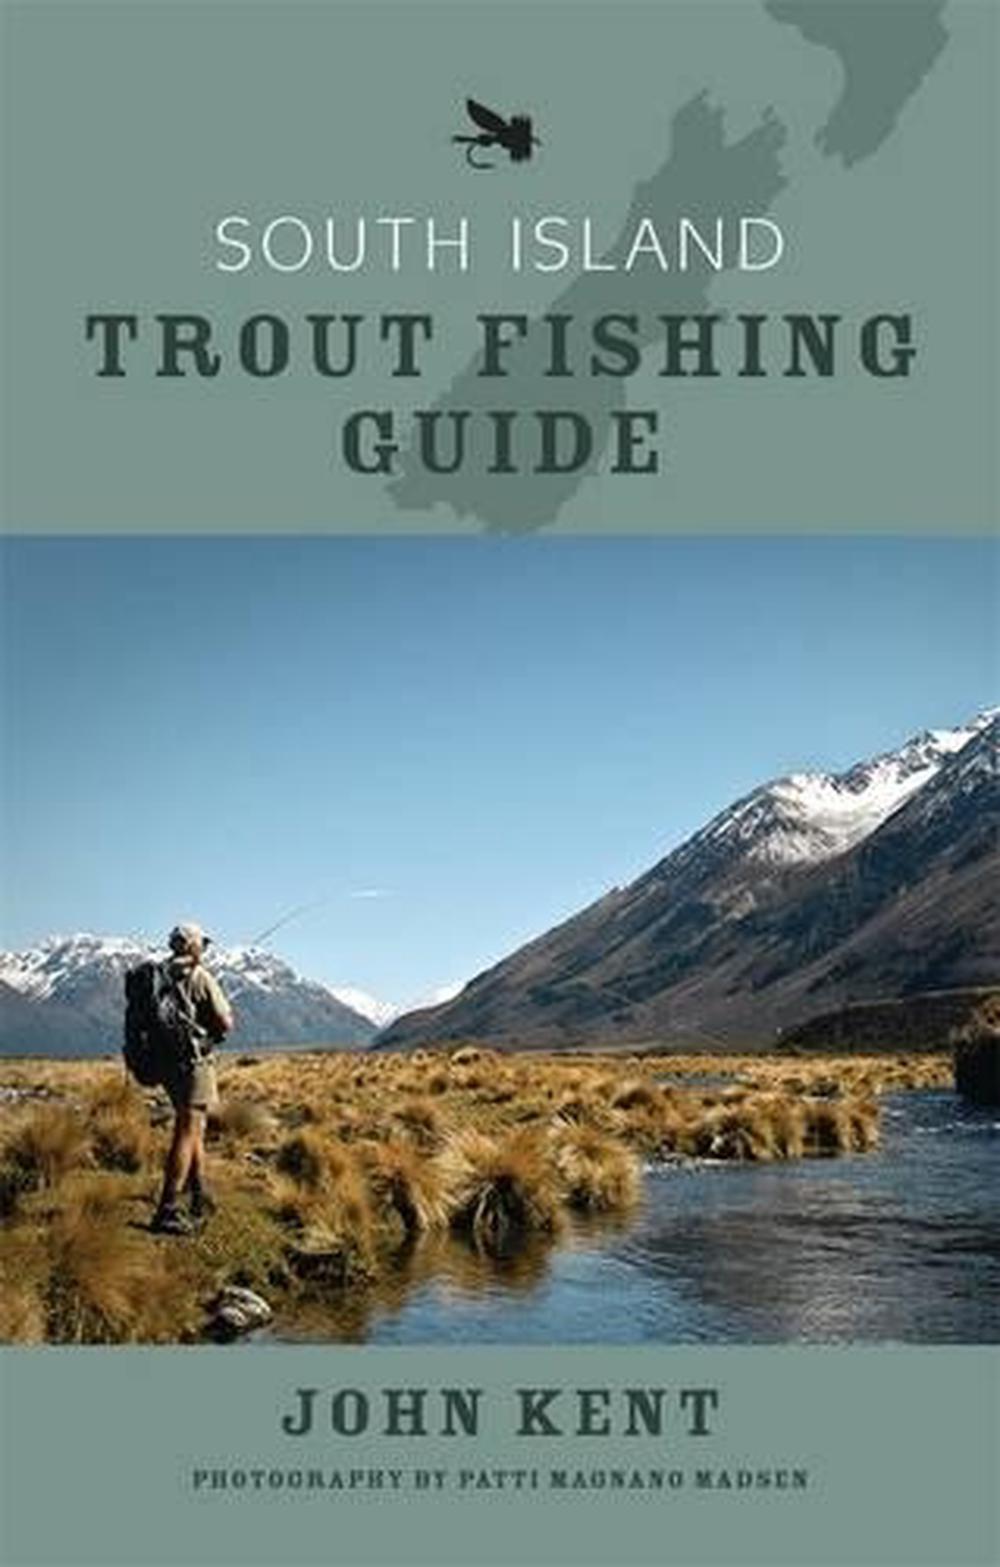 South Island Trout Fishing Guide by John Kent, Paperback, 9780143202684